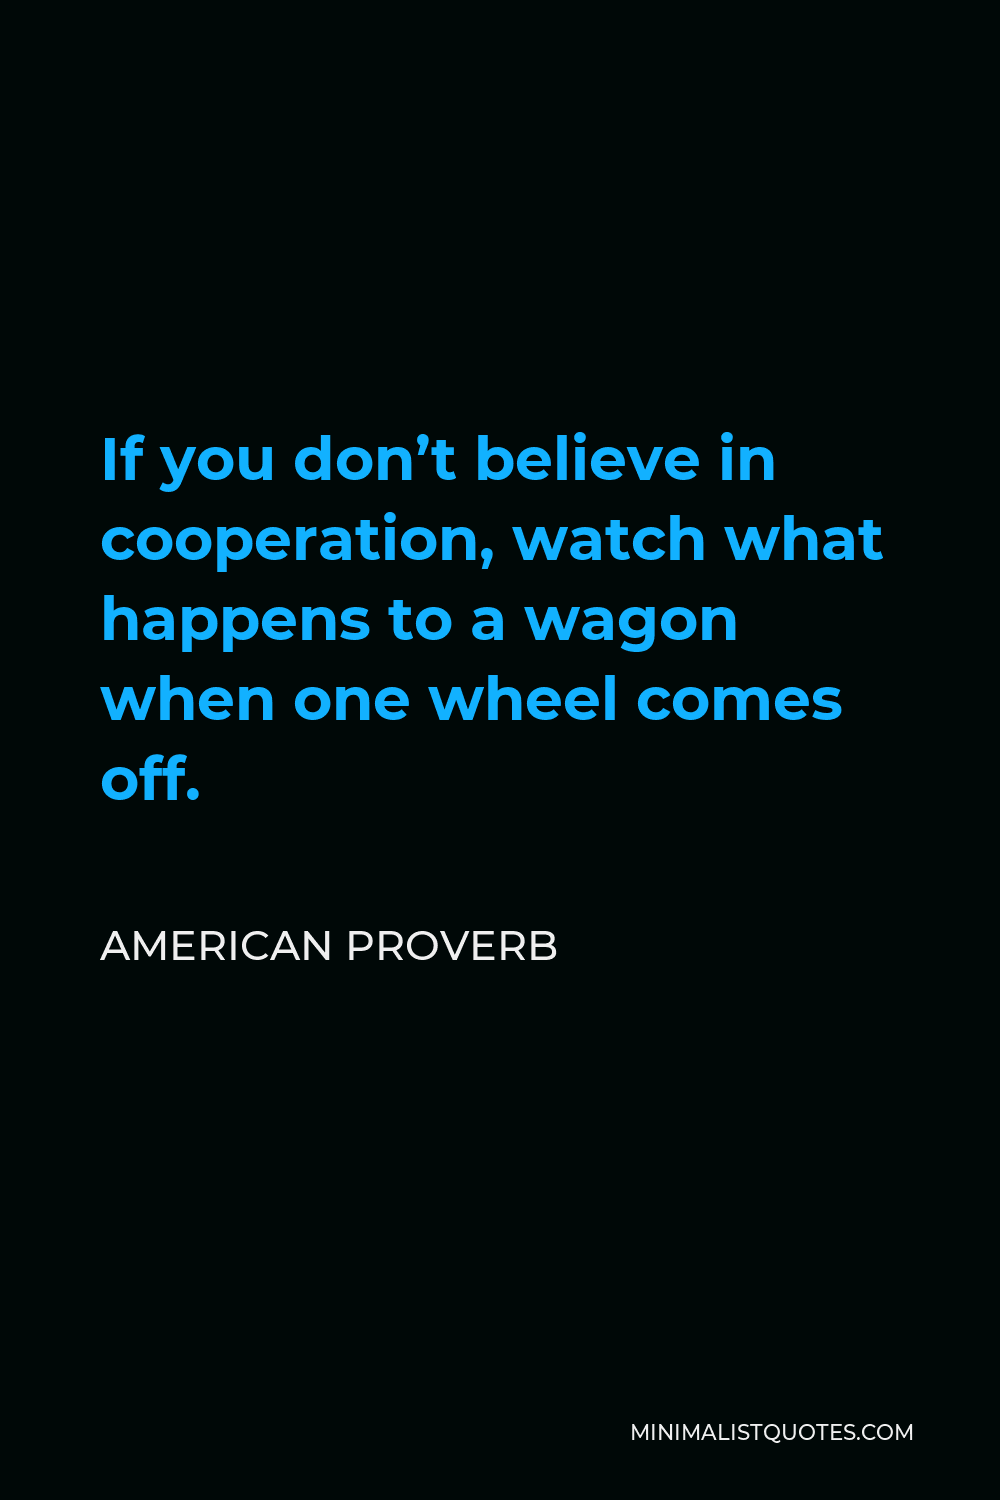 American Proverb Quote - If you don’t believe in cooperation, watch what happens to a wagon when one wheel comes off.